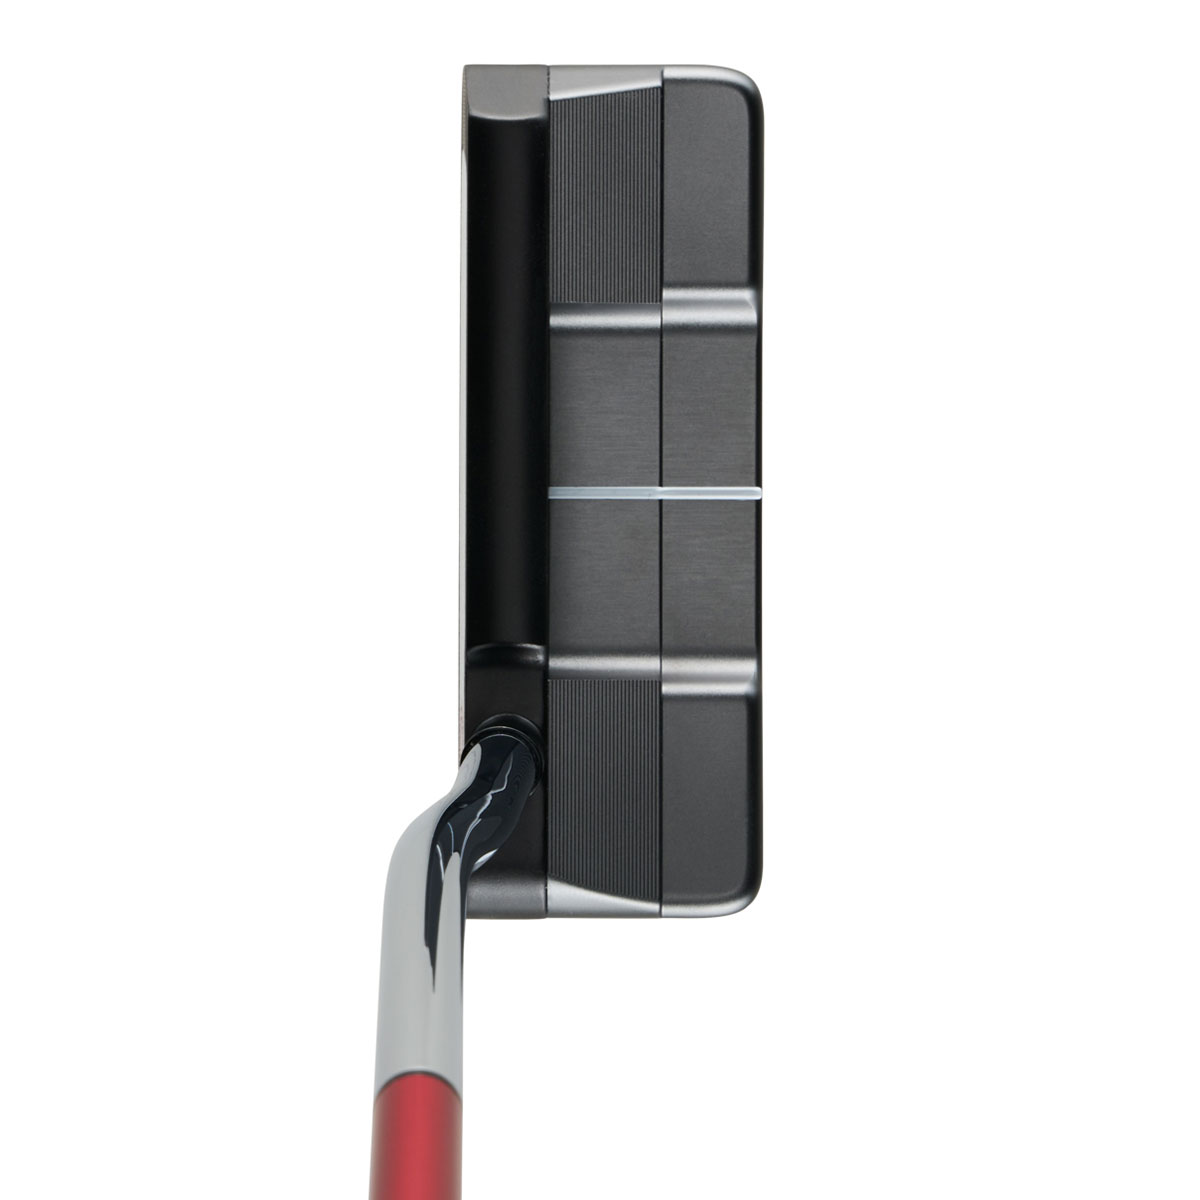 Odyssey Tri-Hot 5K Double Wide DB Golf Putter from american golf